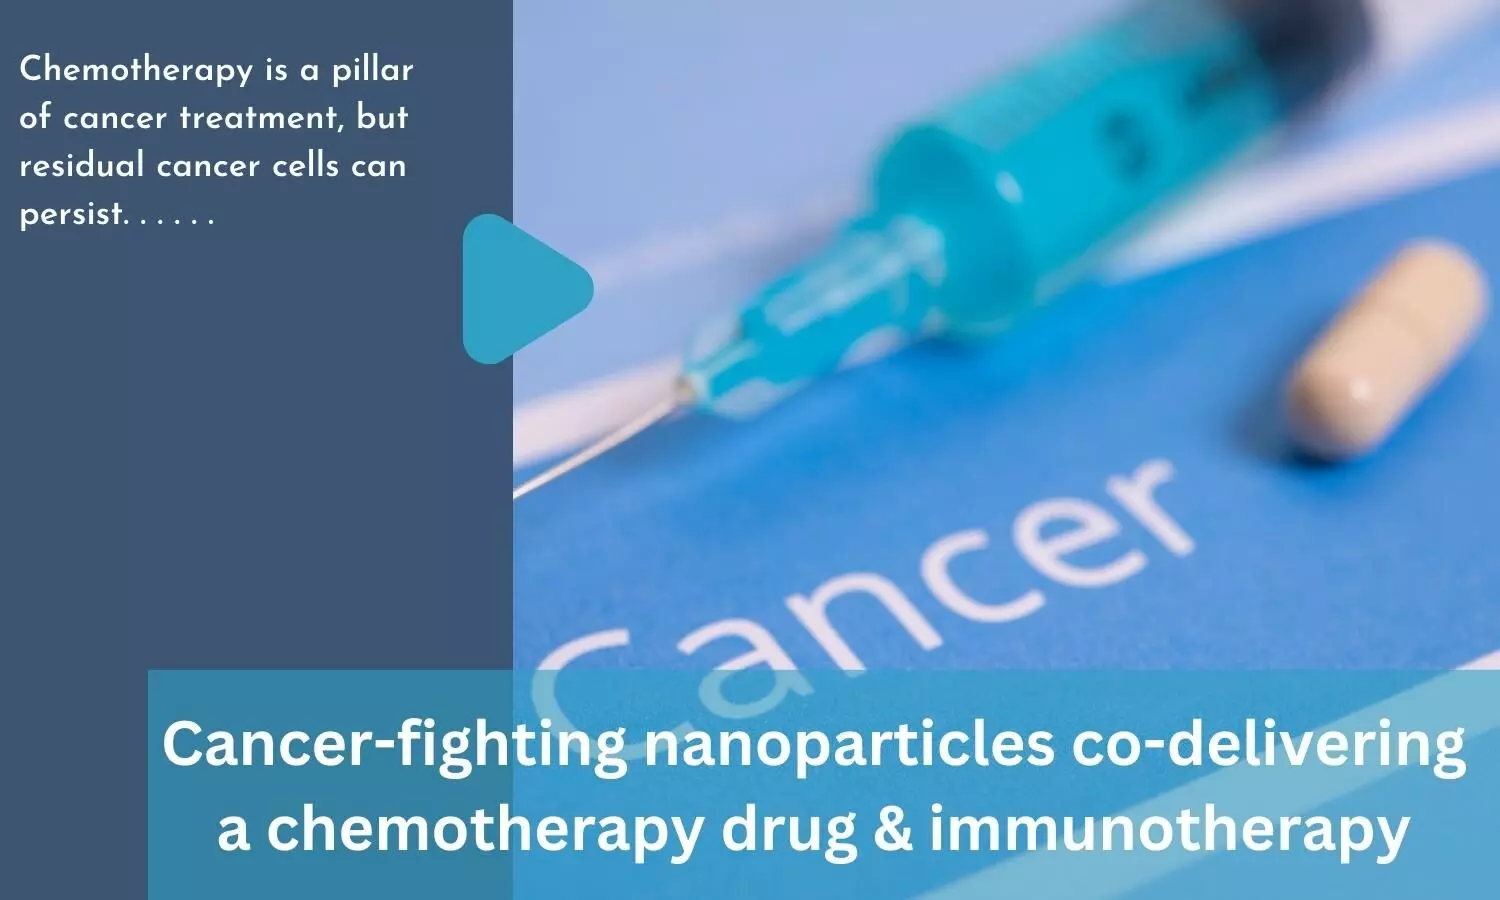 Cancer-fighting nanoparticles co-delivering a chemotherapy drug & immunotherapy